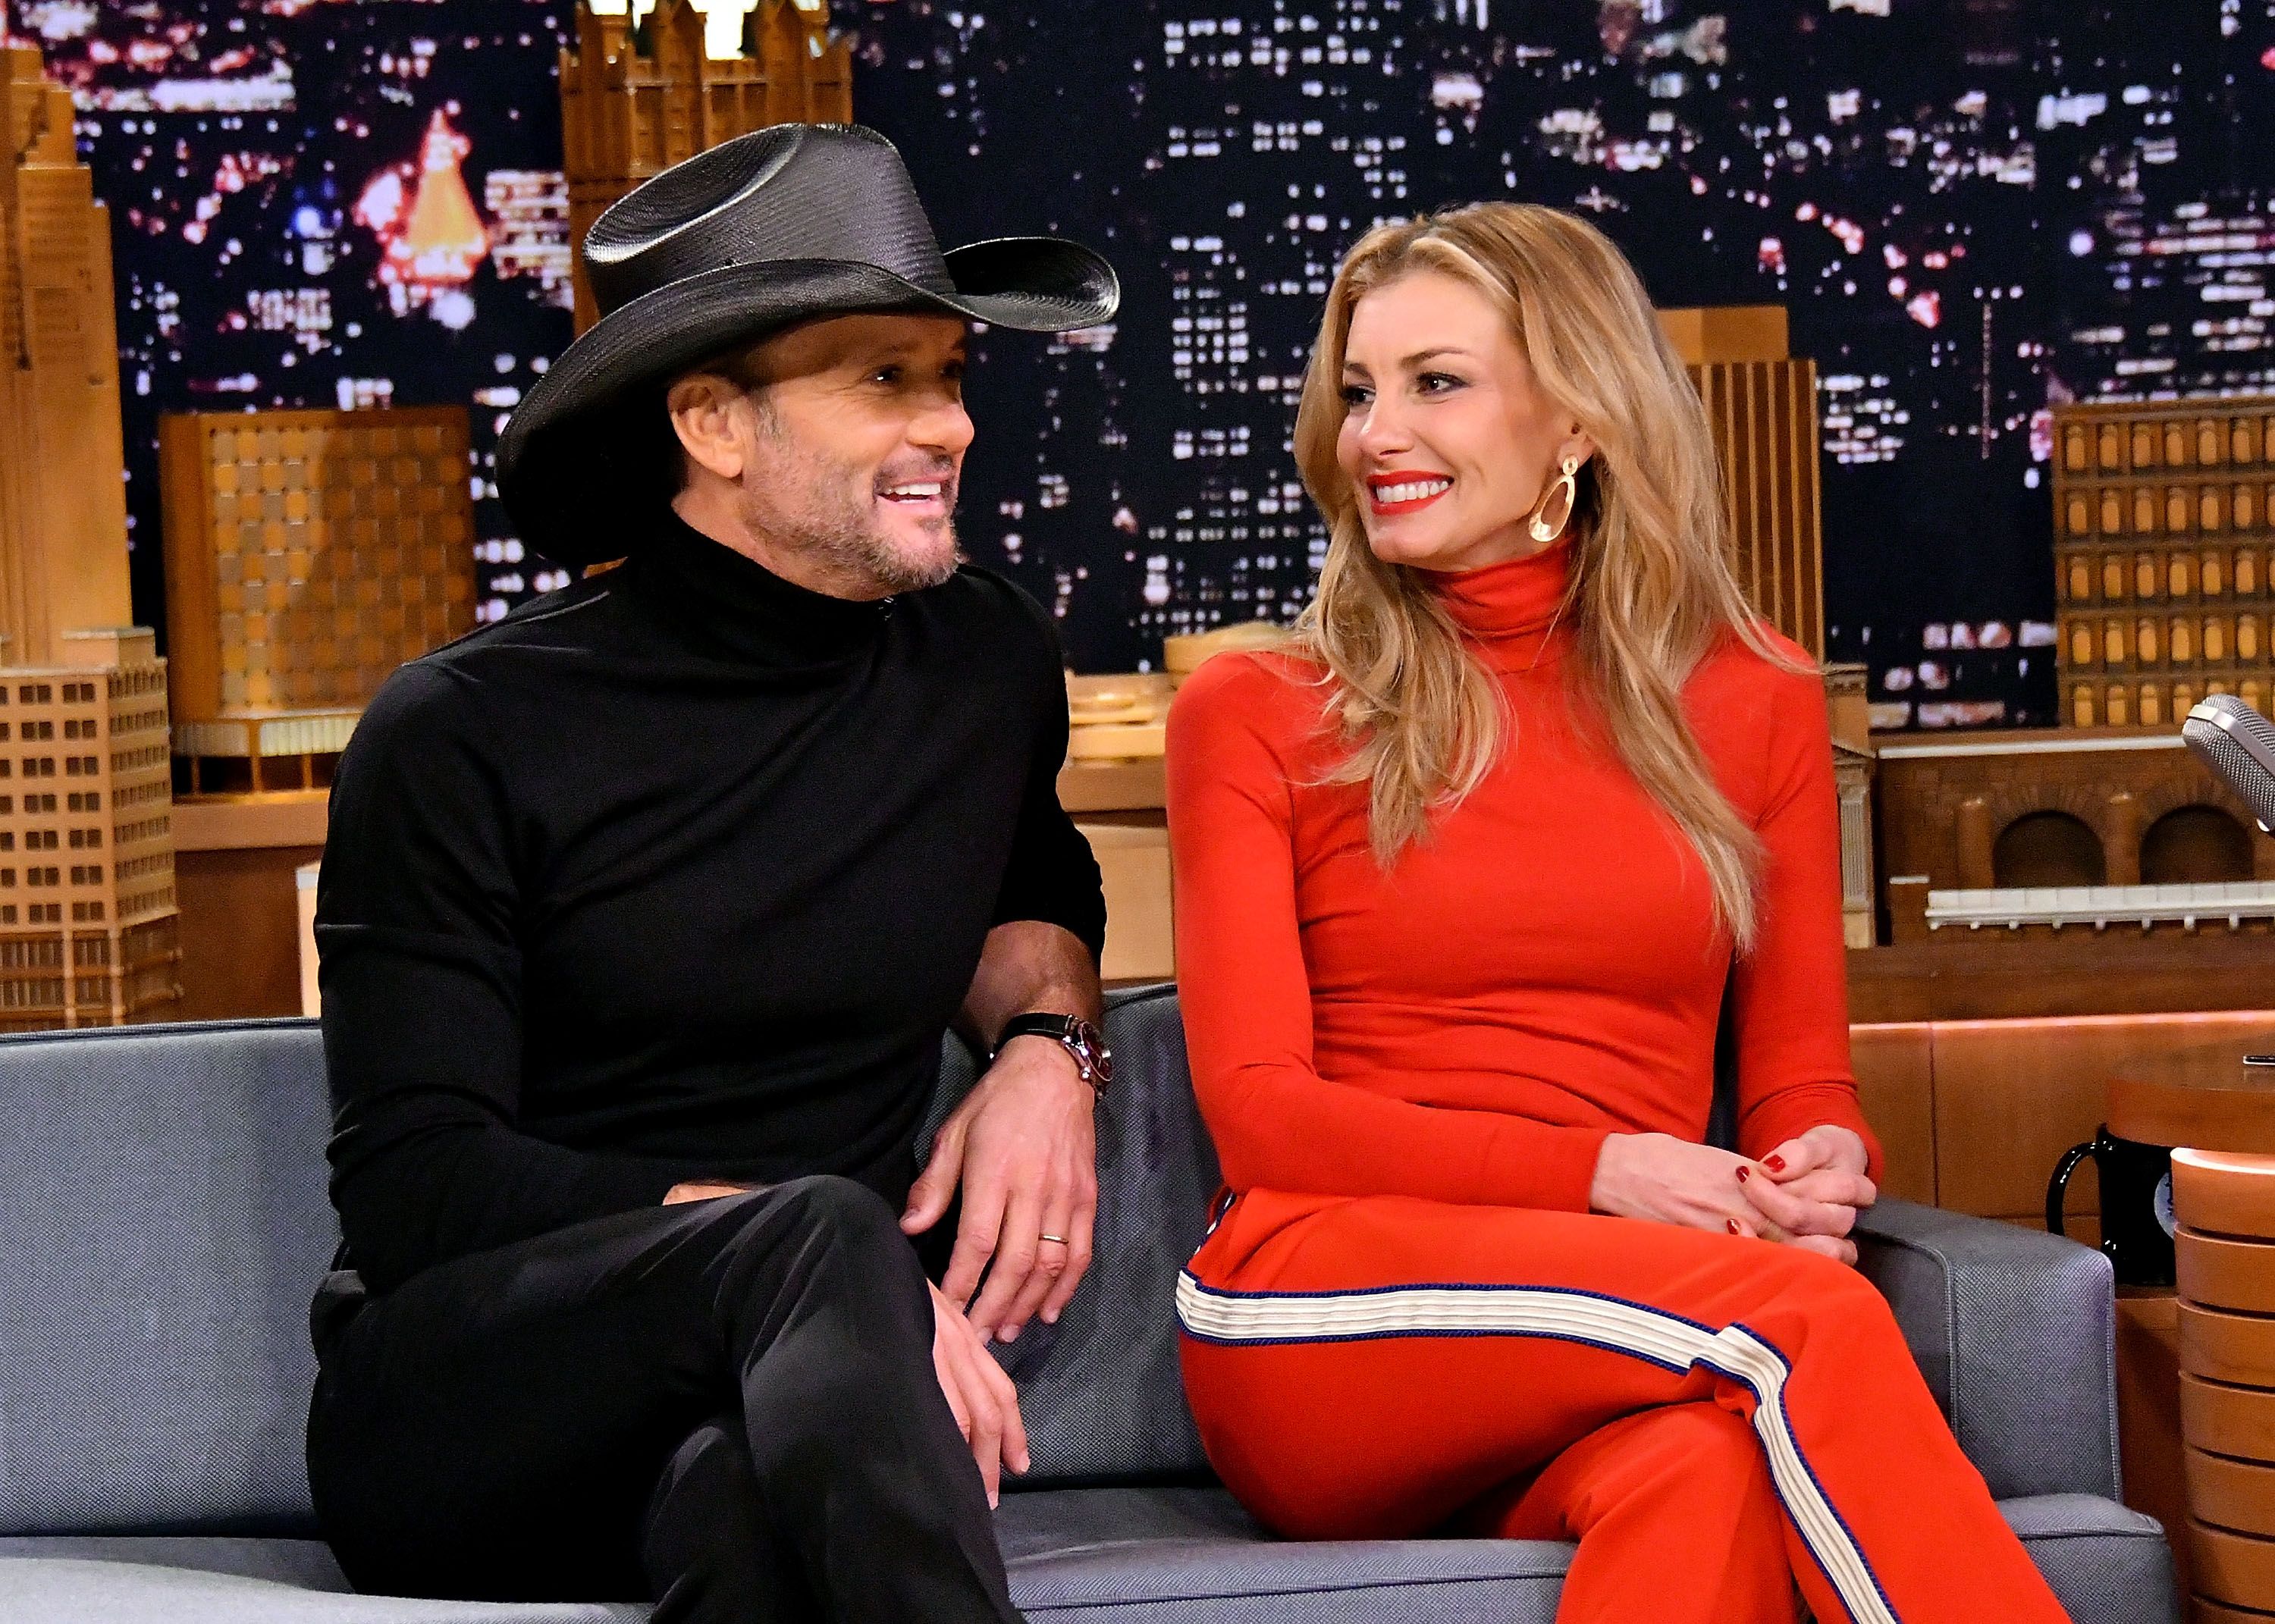 Singer/songwriter Tim McGraw and wife/singer Faith Hill are interviewed on "The Tonight Show Starring Jimmy Fallon" at Rockefeller Center on November 16, 2017 | Photo: Getty Images